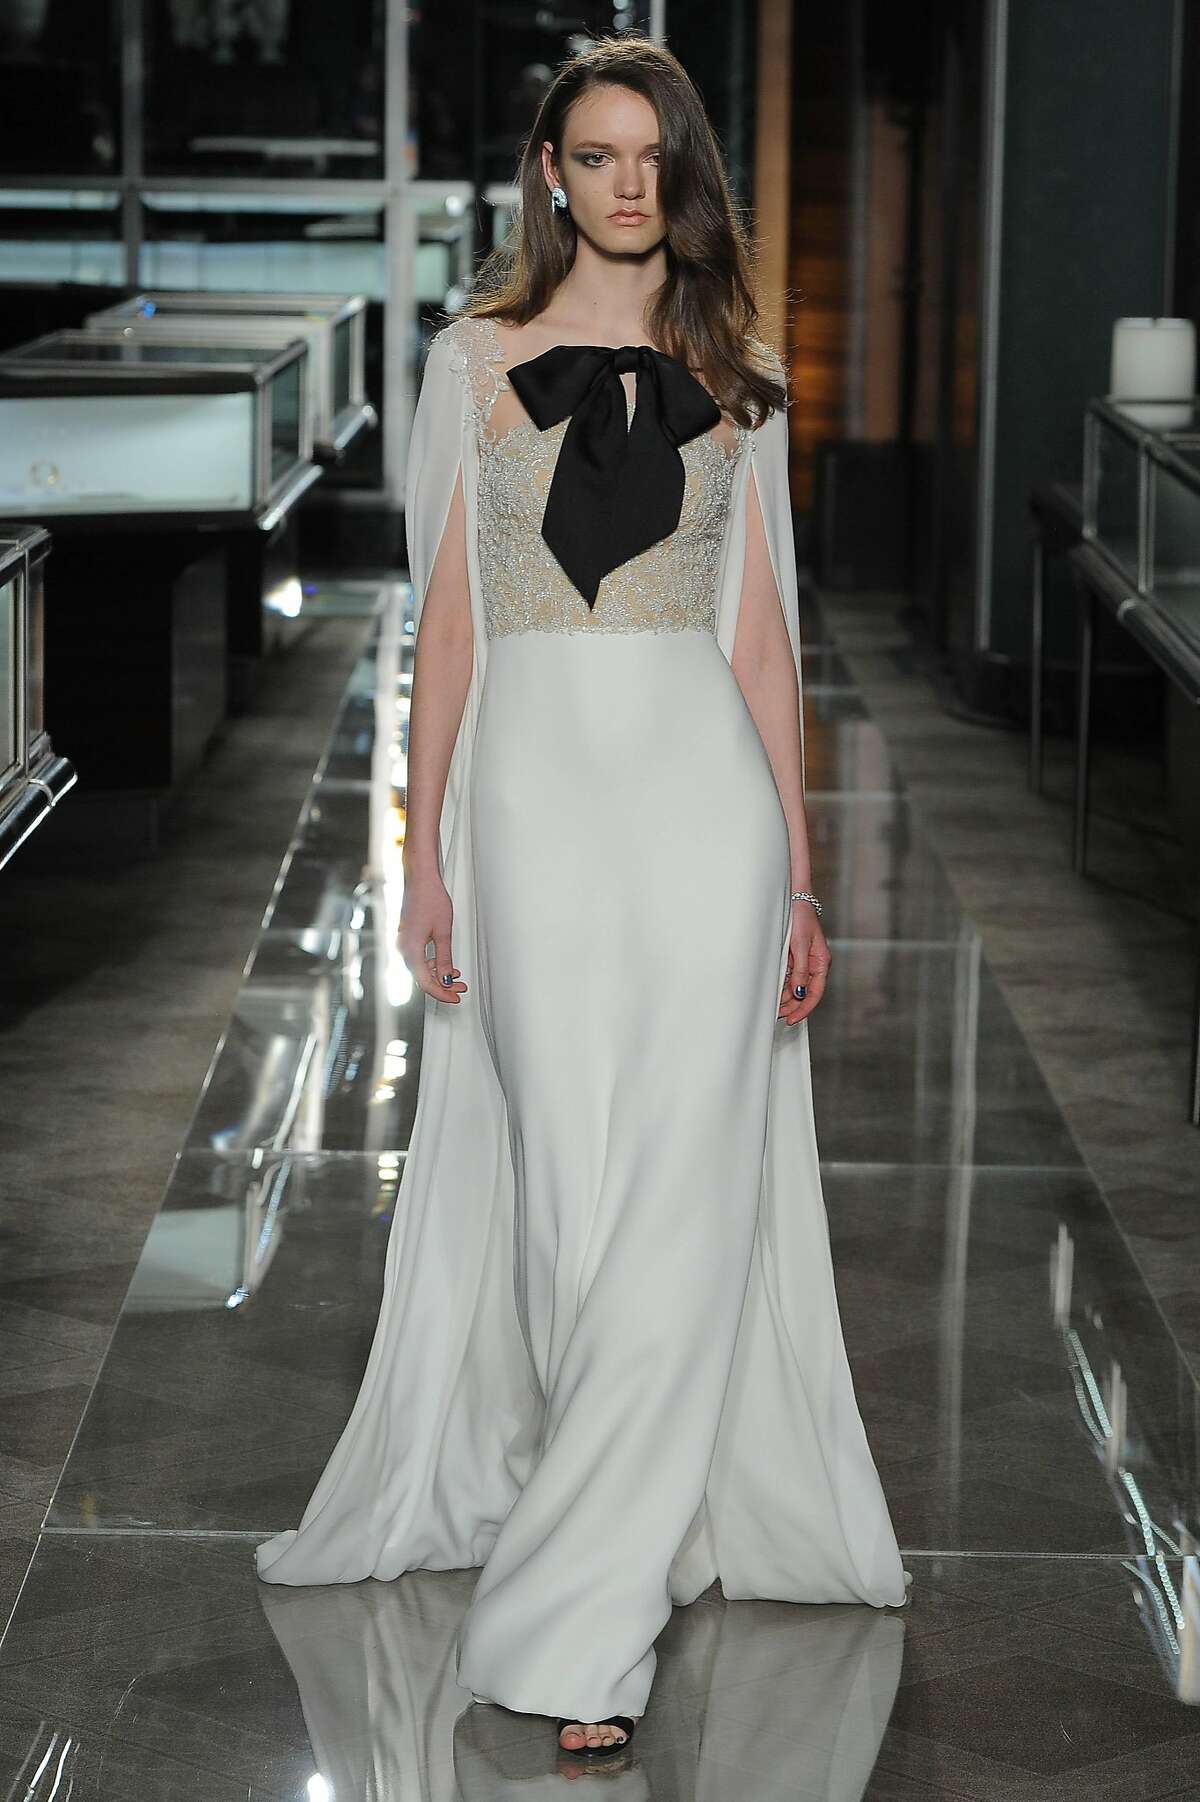 Bridal looks with black accents by Reem Acra.